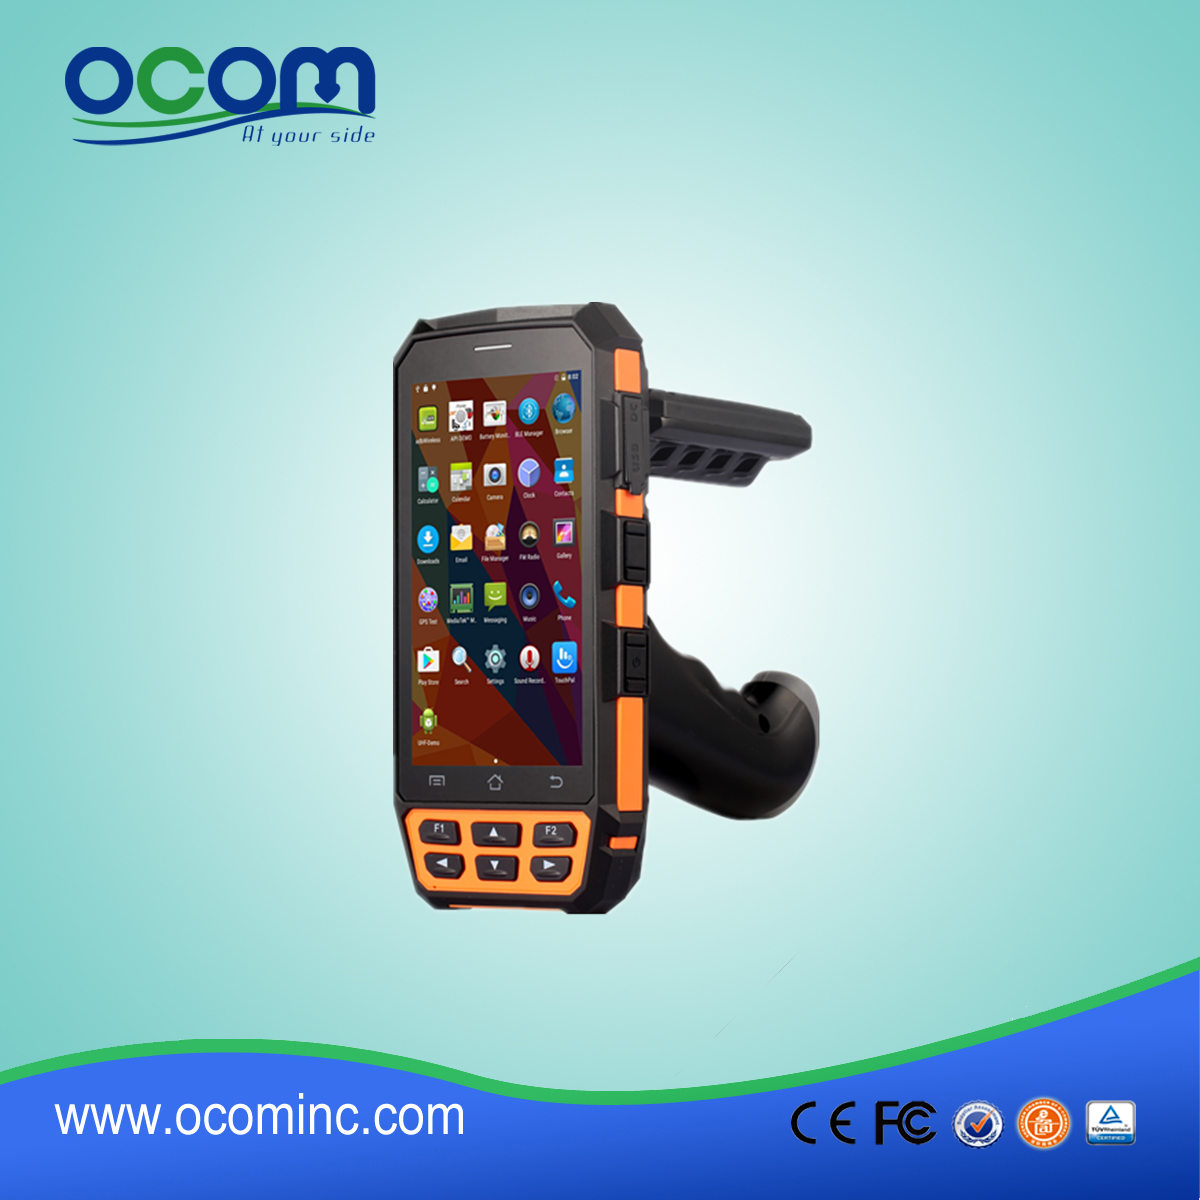 OCBS-D5000 Industrial Android 5.1 Barcode Scanner PDA with WIFI